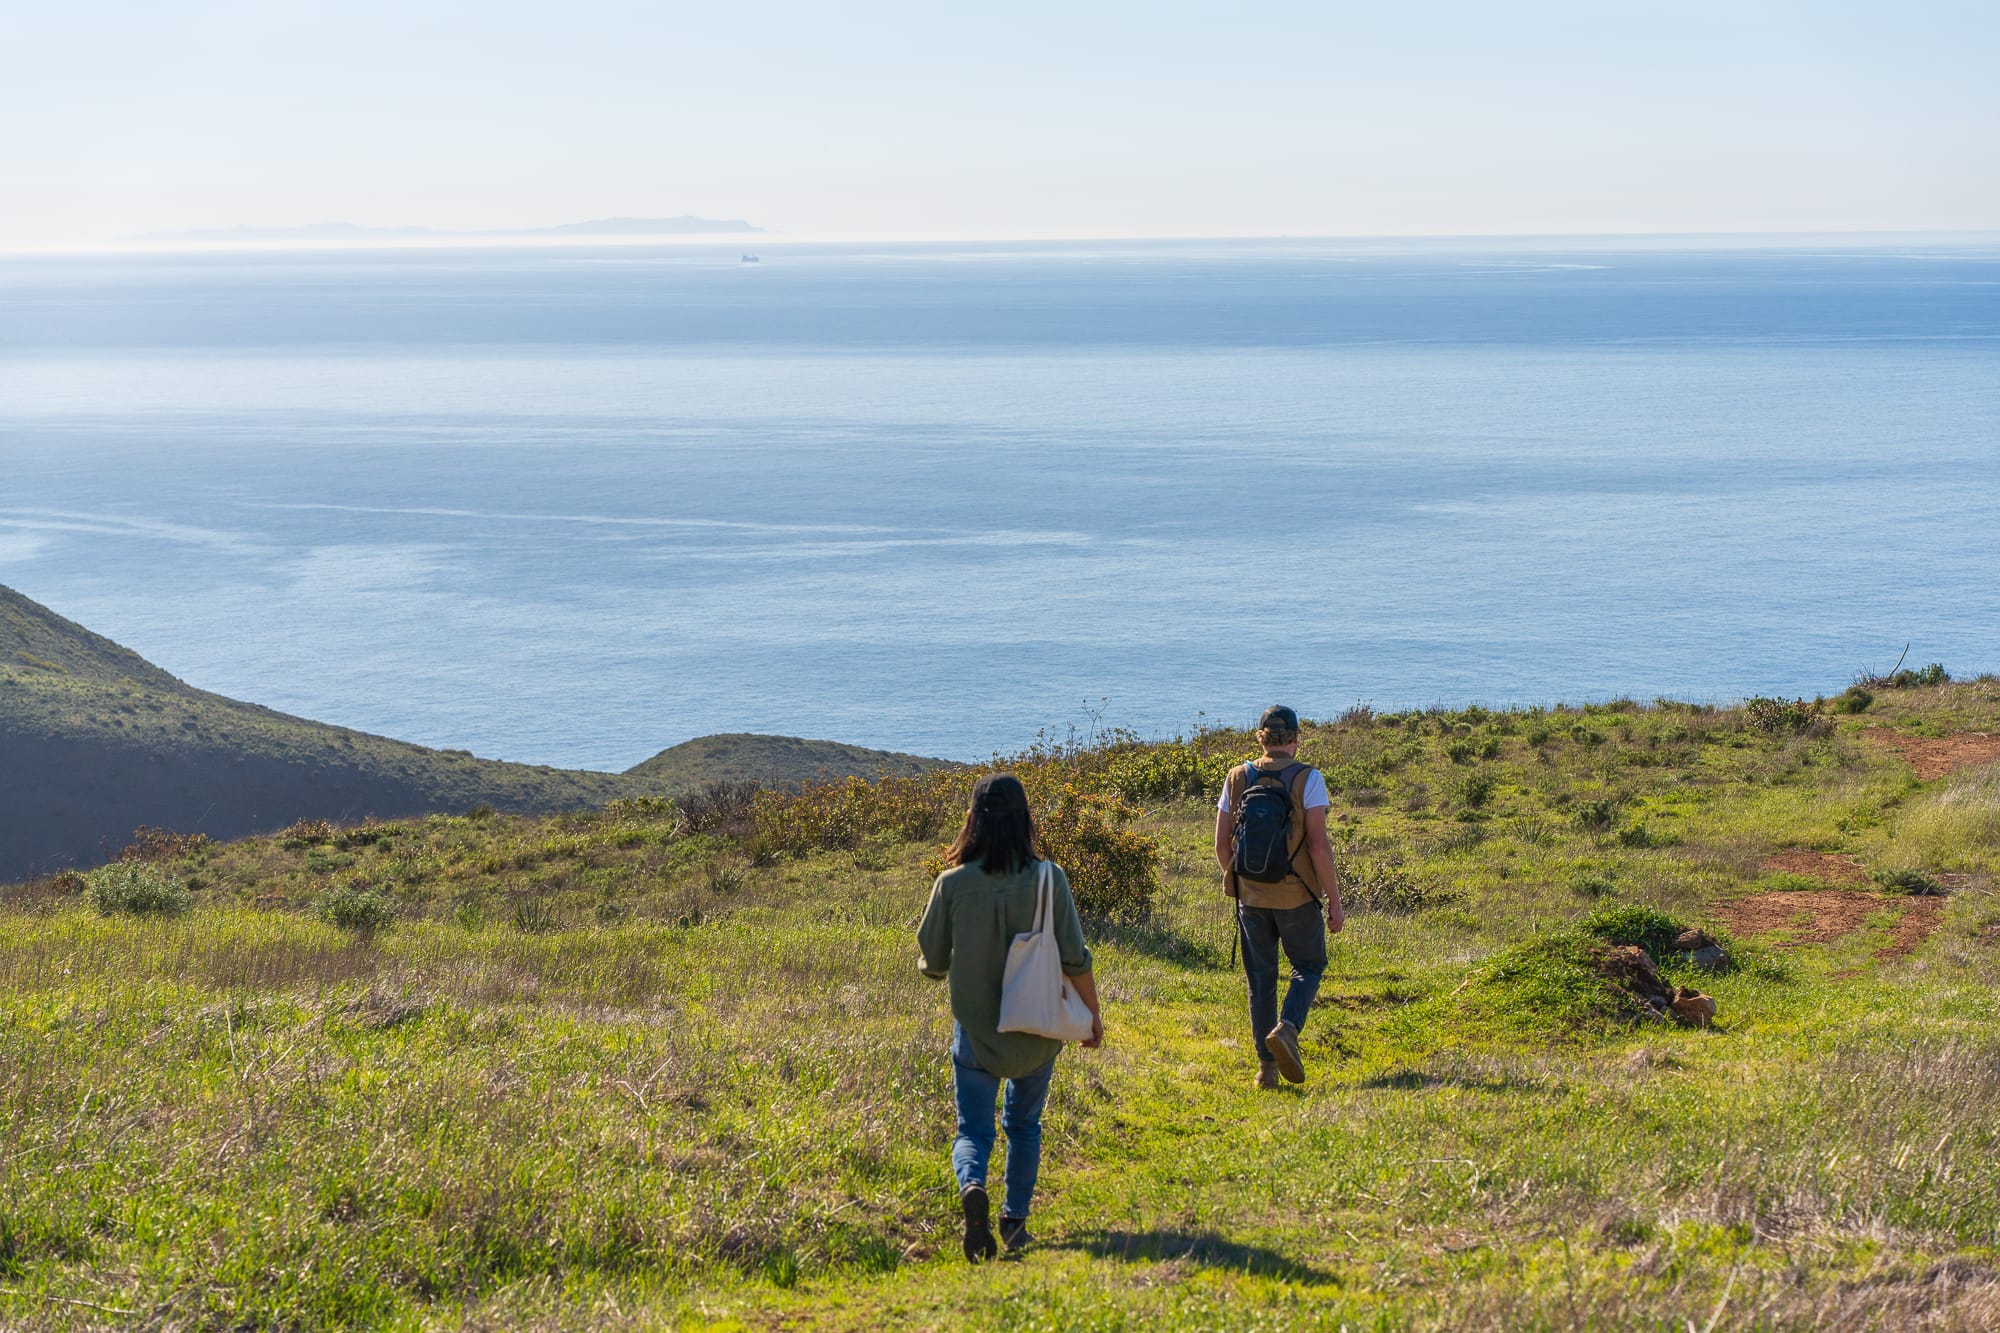 Two people walking down a hill next to the ocean.